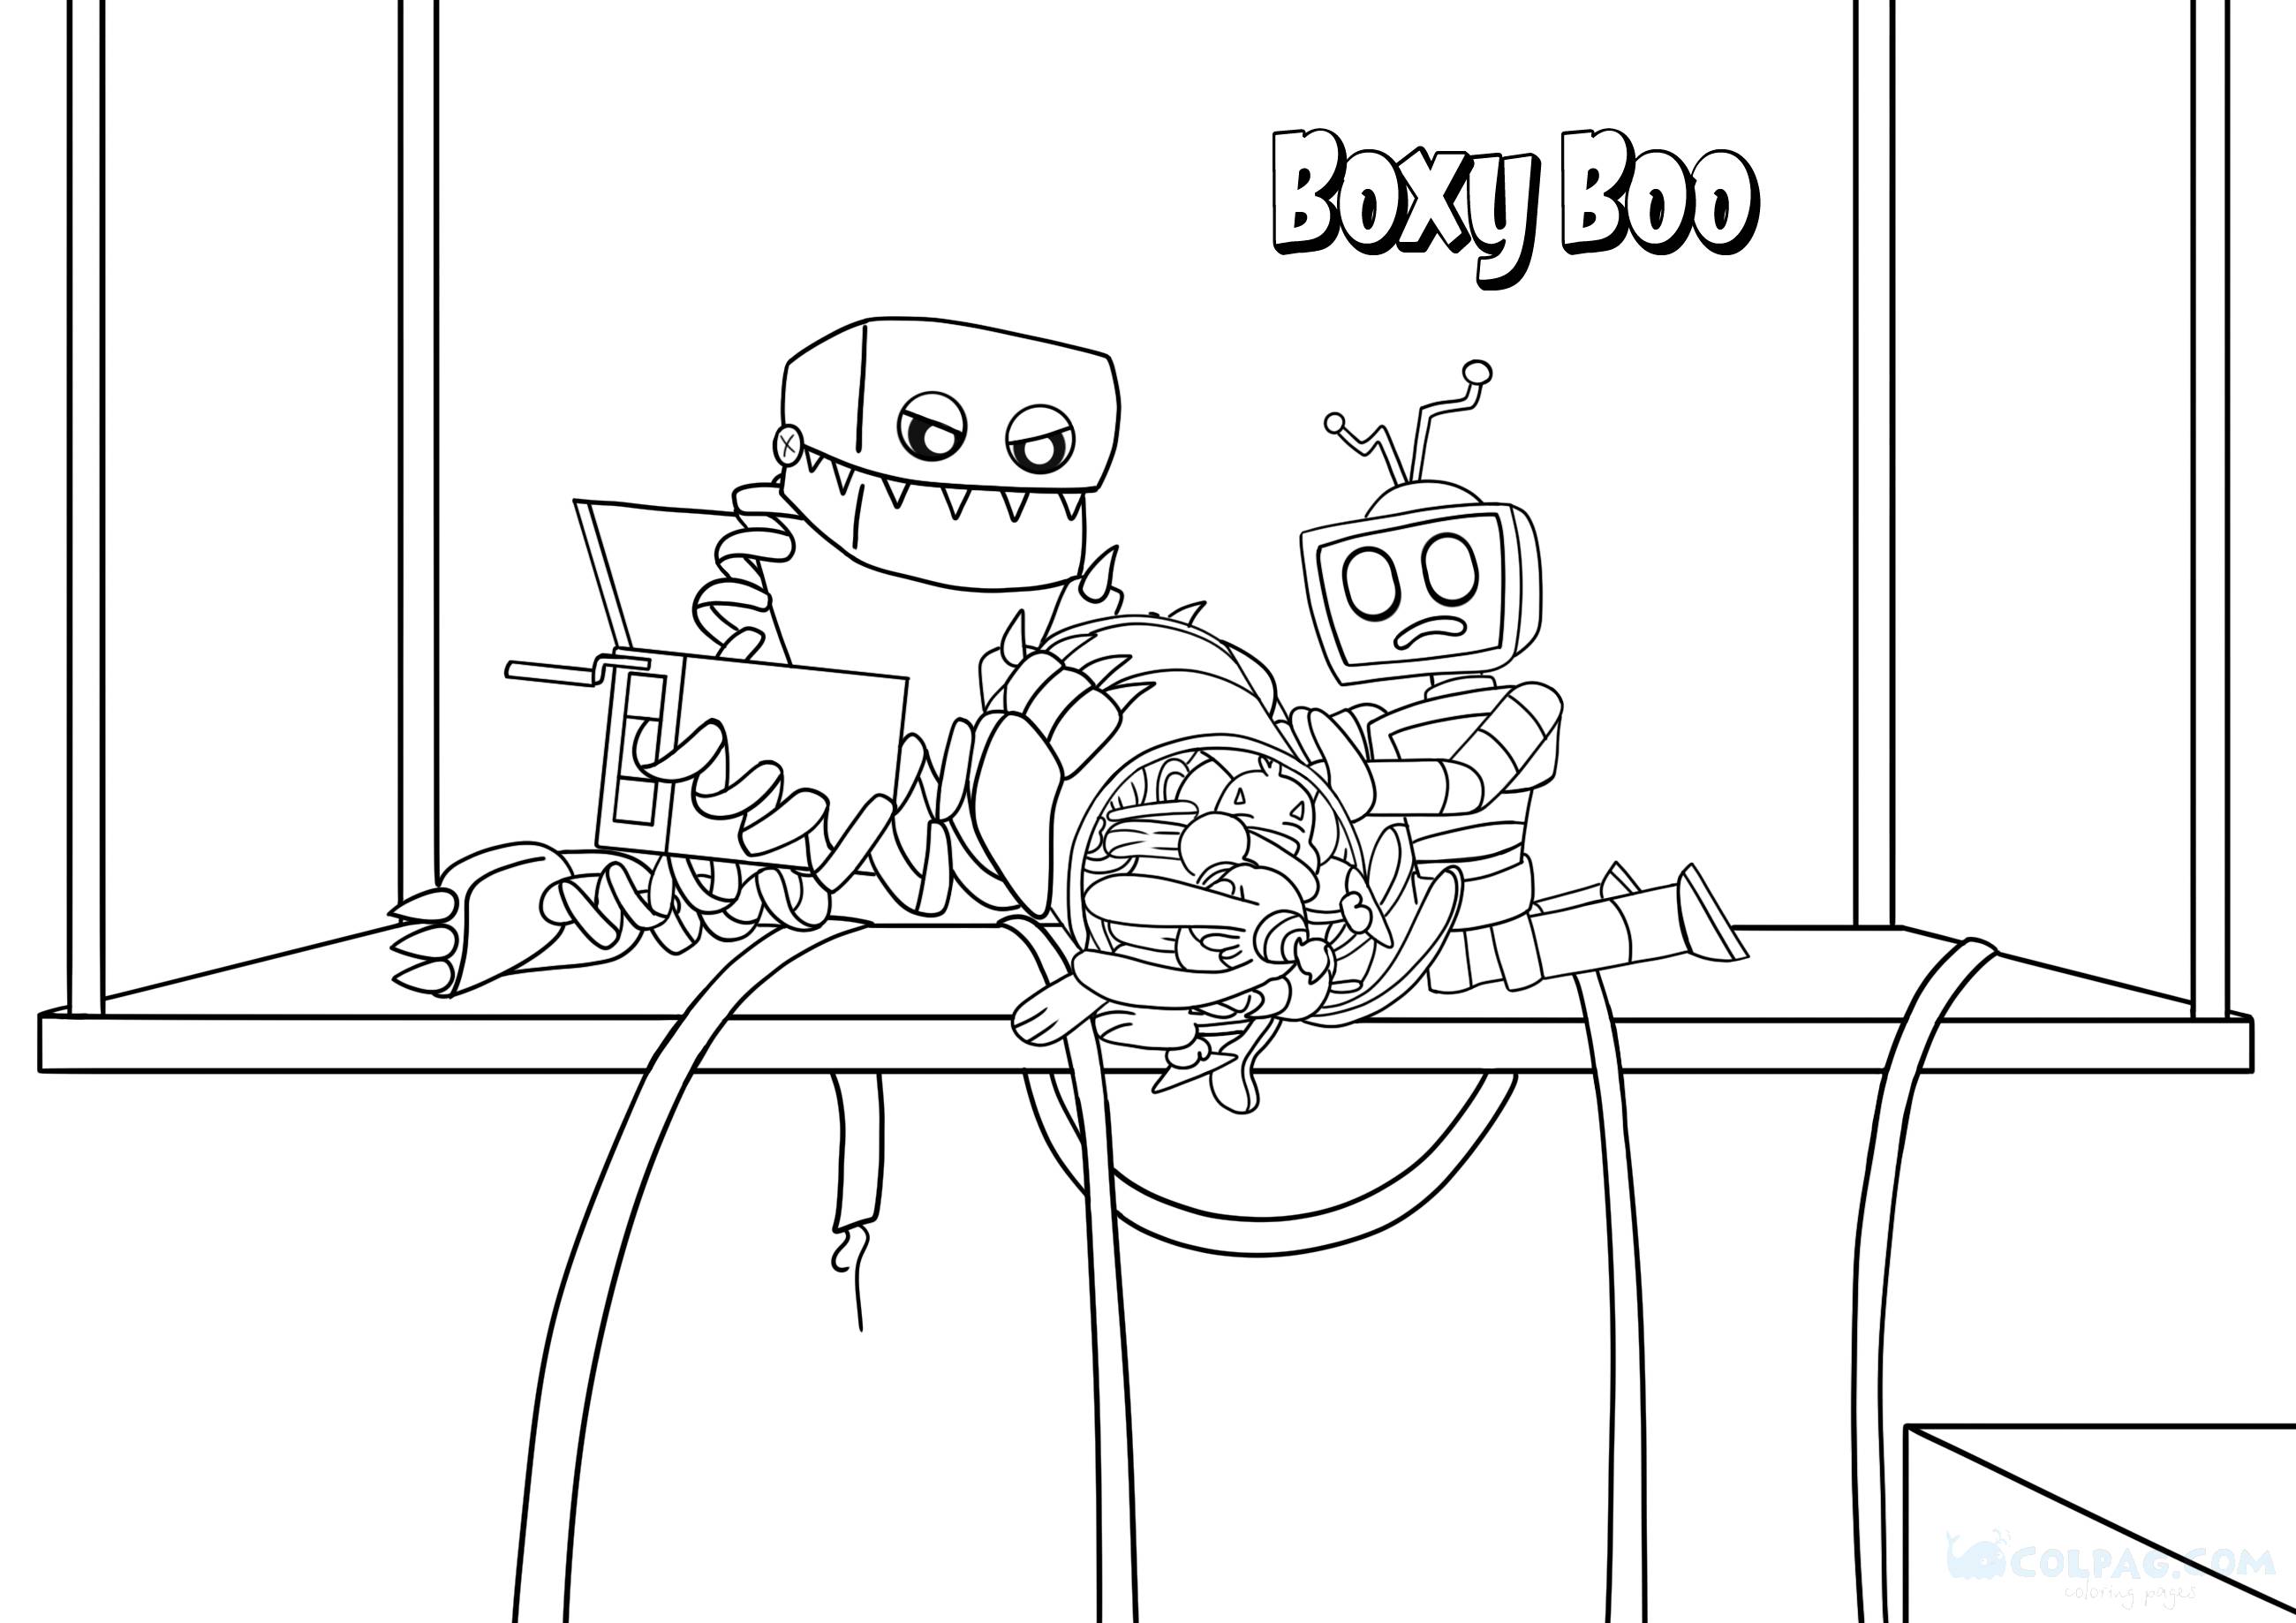 boxy-boo-project-playtime-coloring-page-colpag-com-4